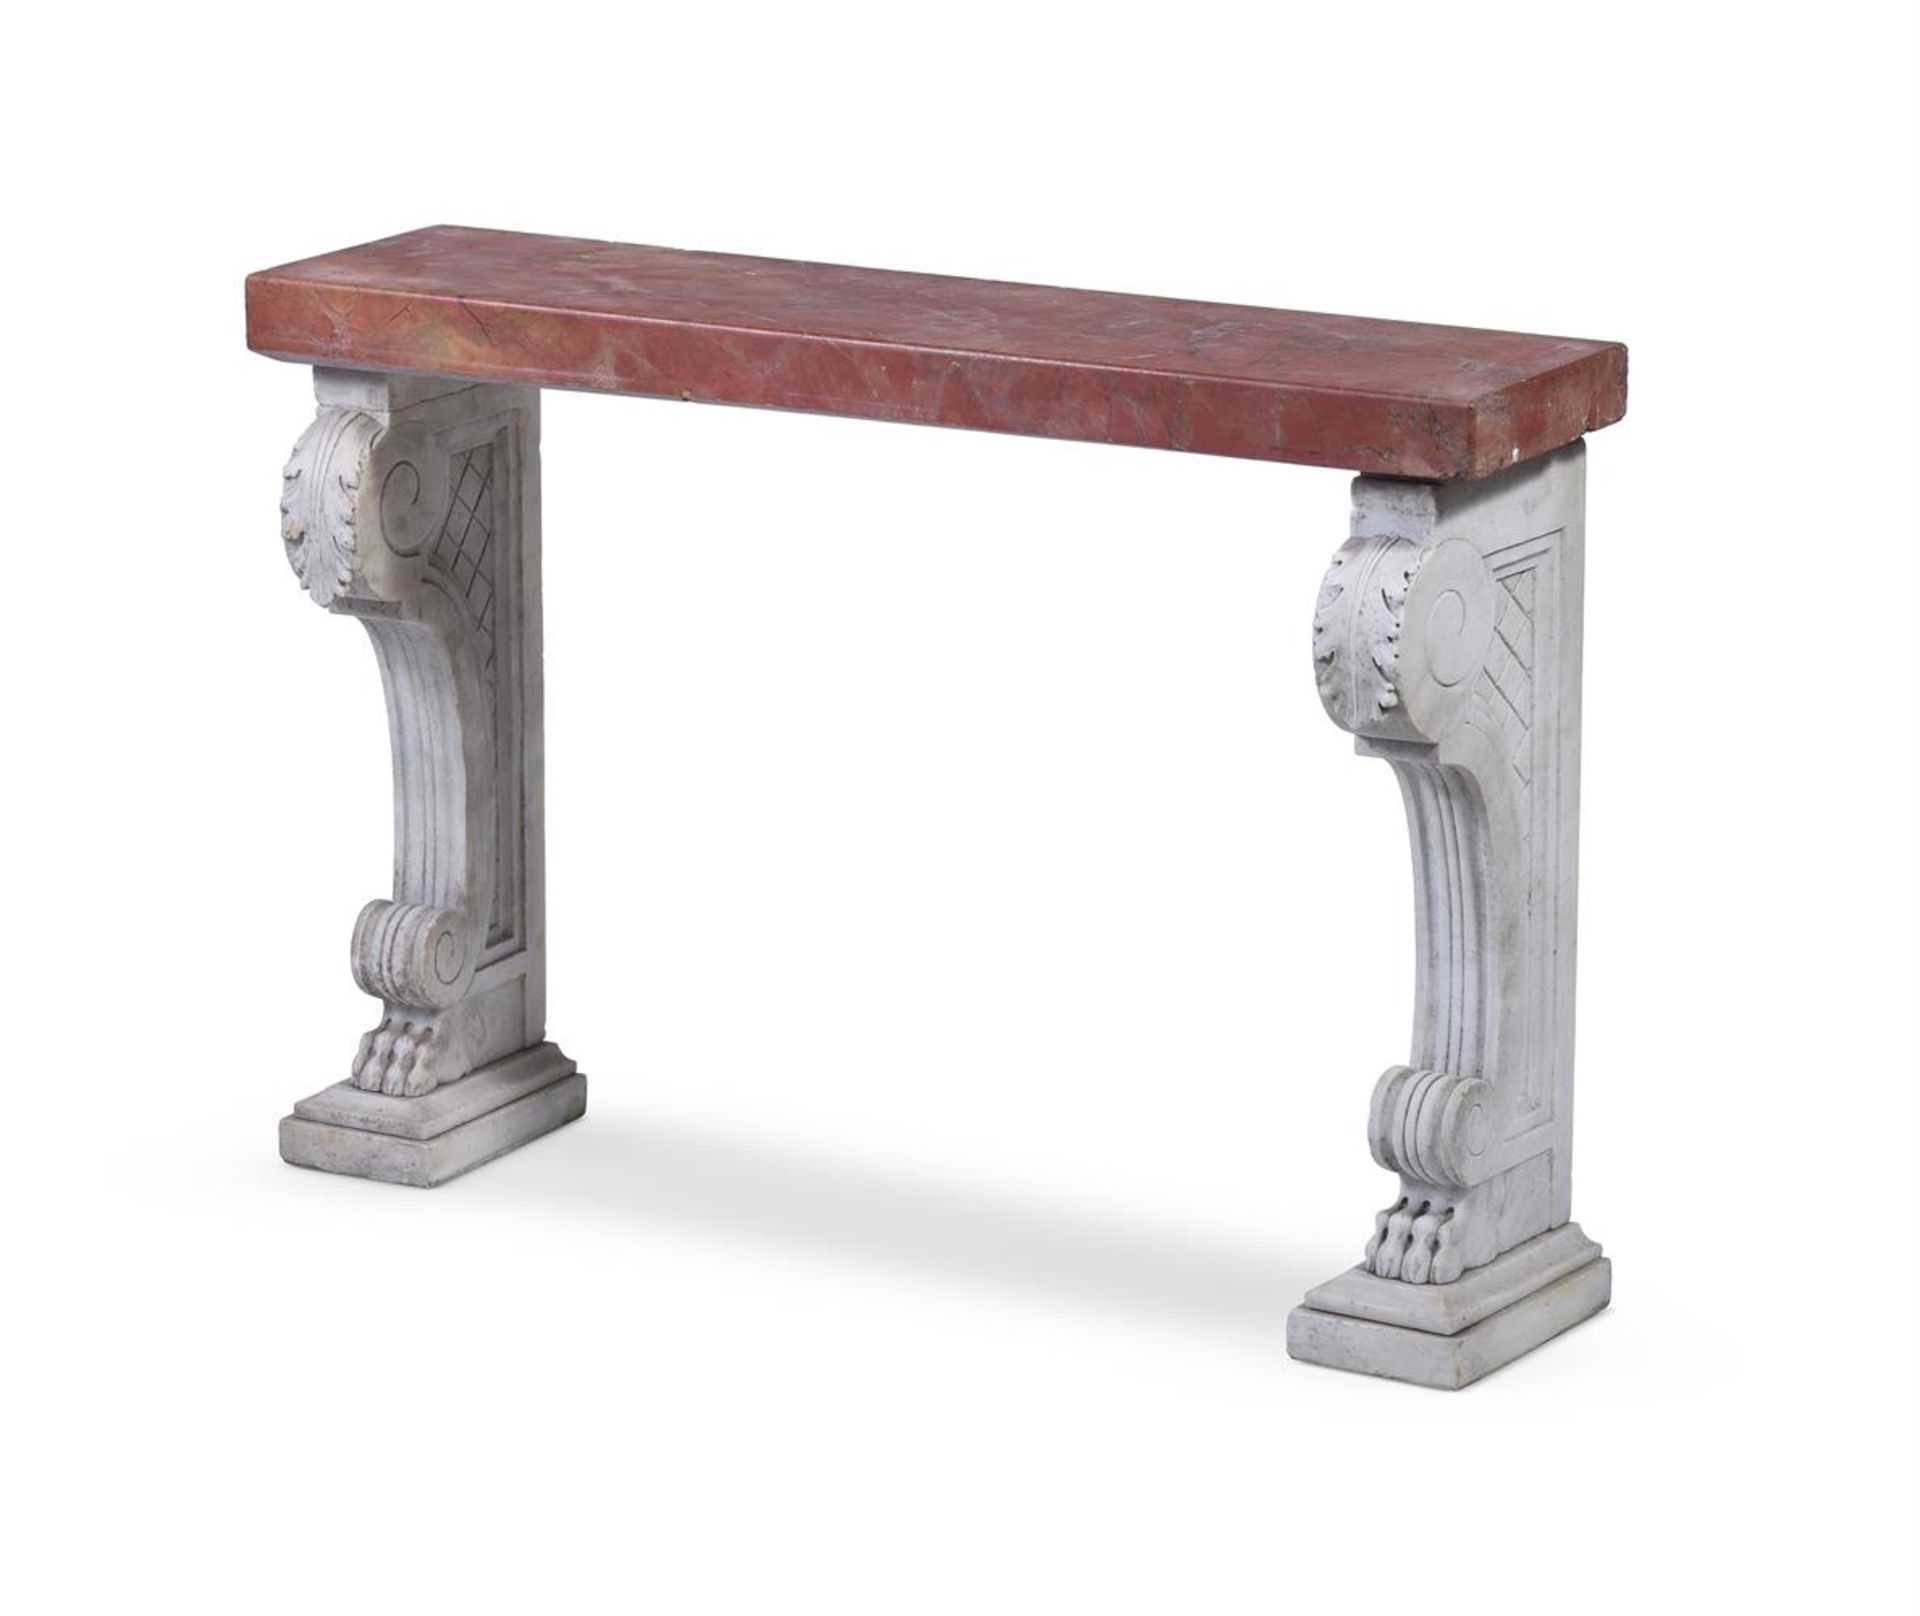 AN ITALIAN SMALL RED AND WHITE CARRARA MARBLE BENCH, 19TH CENTURY